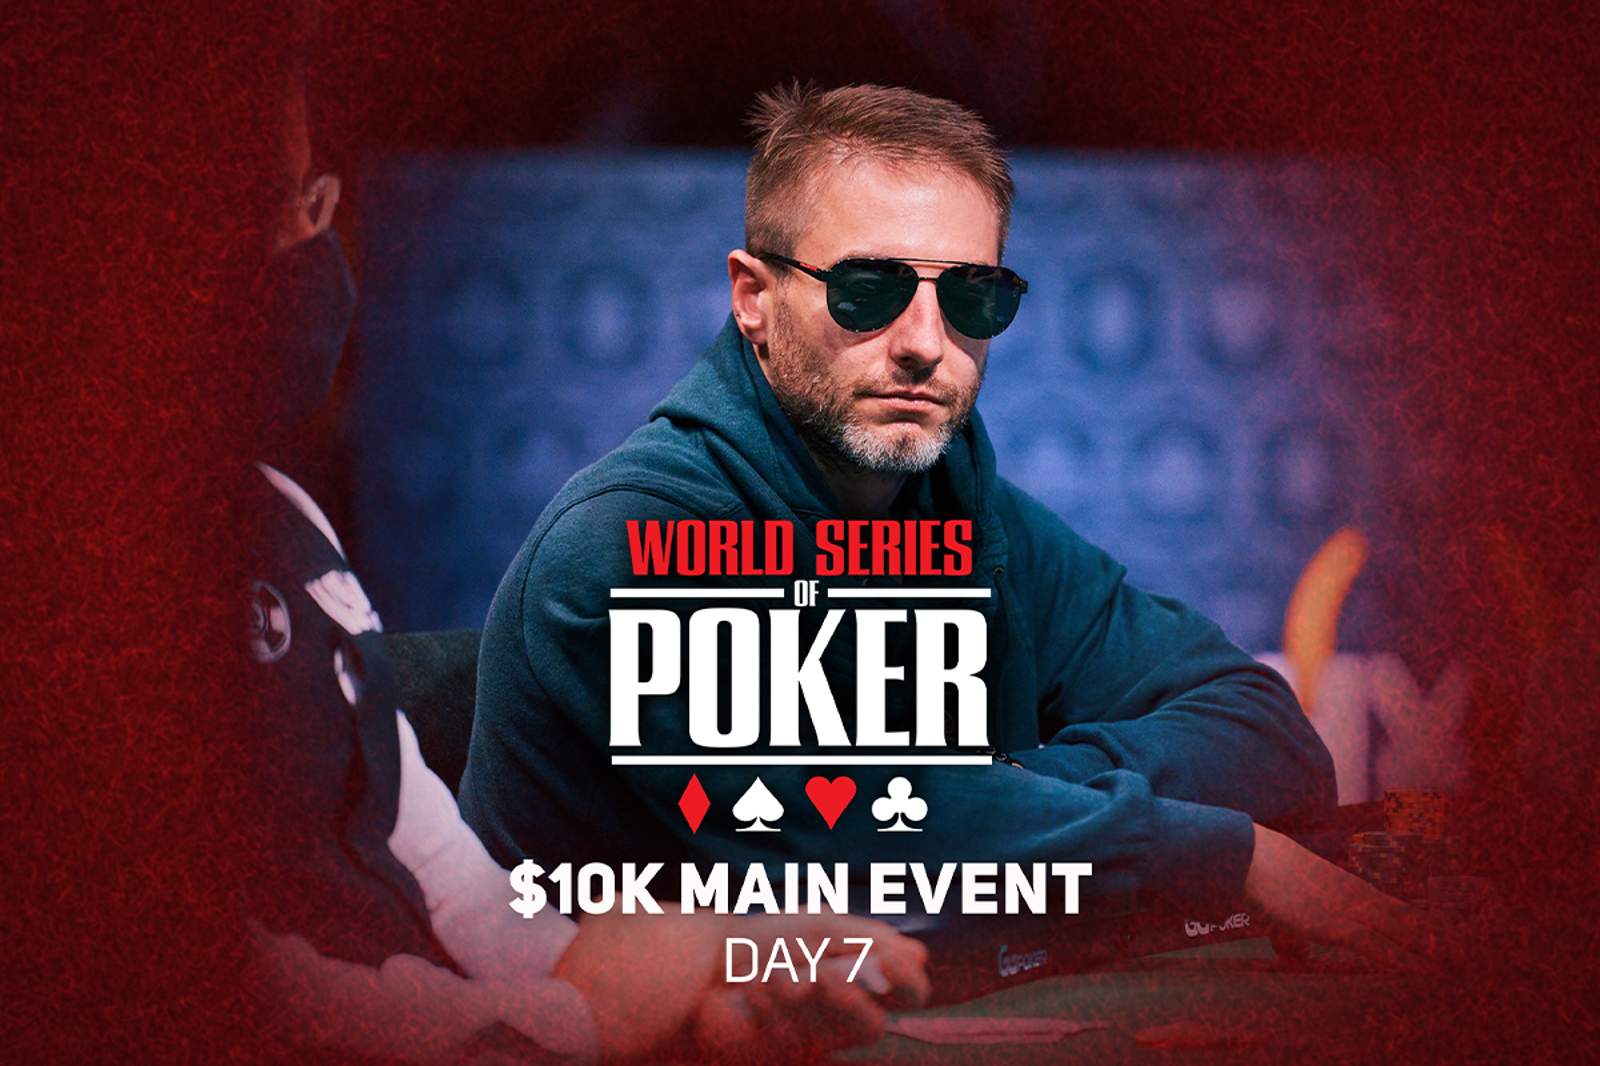 Watch Day 7 of the 2021 WSOP Main Event on PokerGO.com at 4 p.m. ET